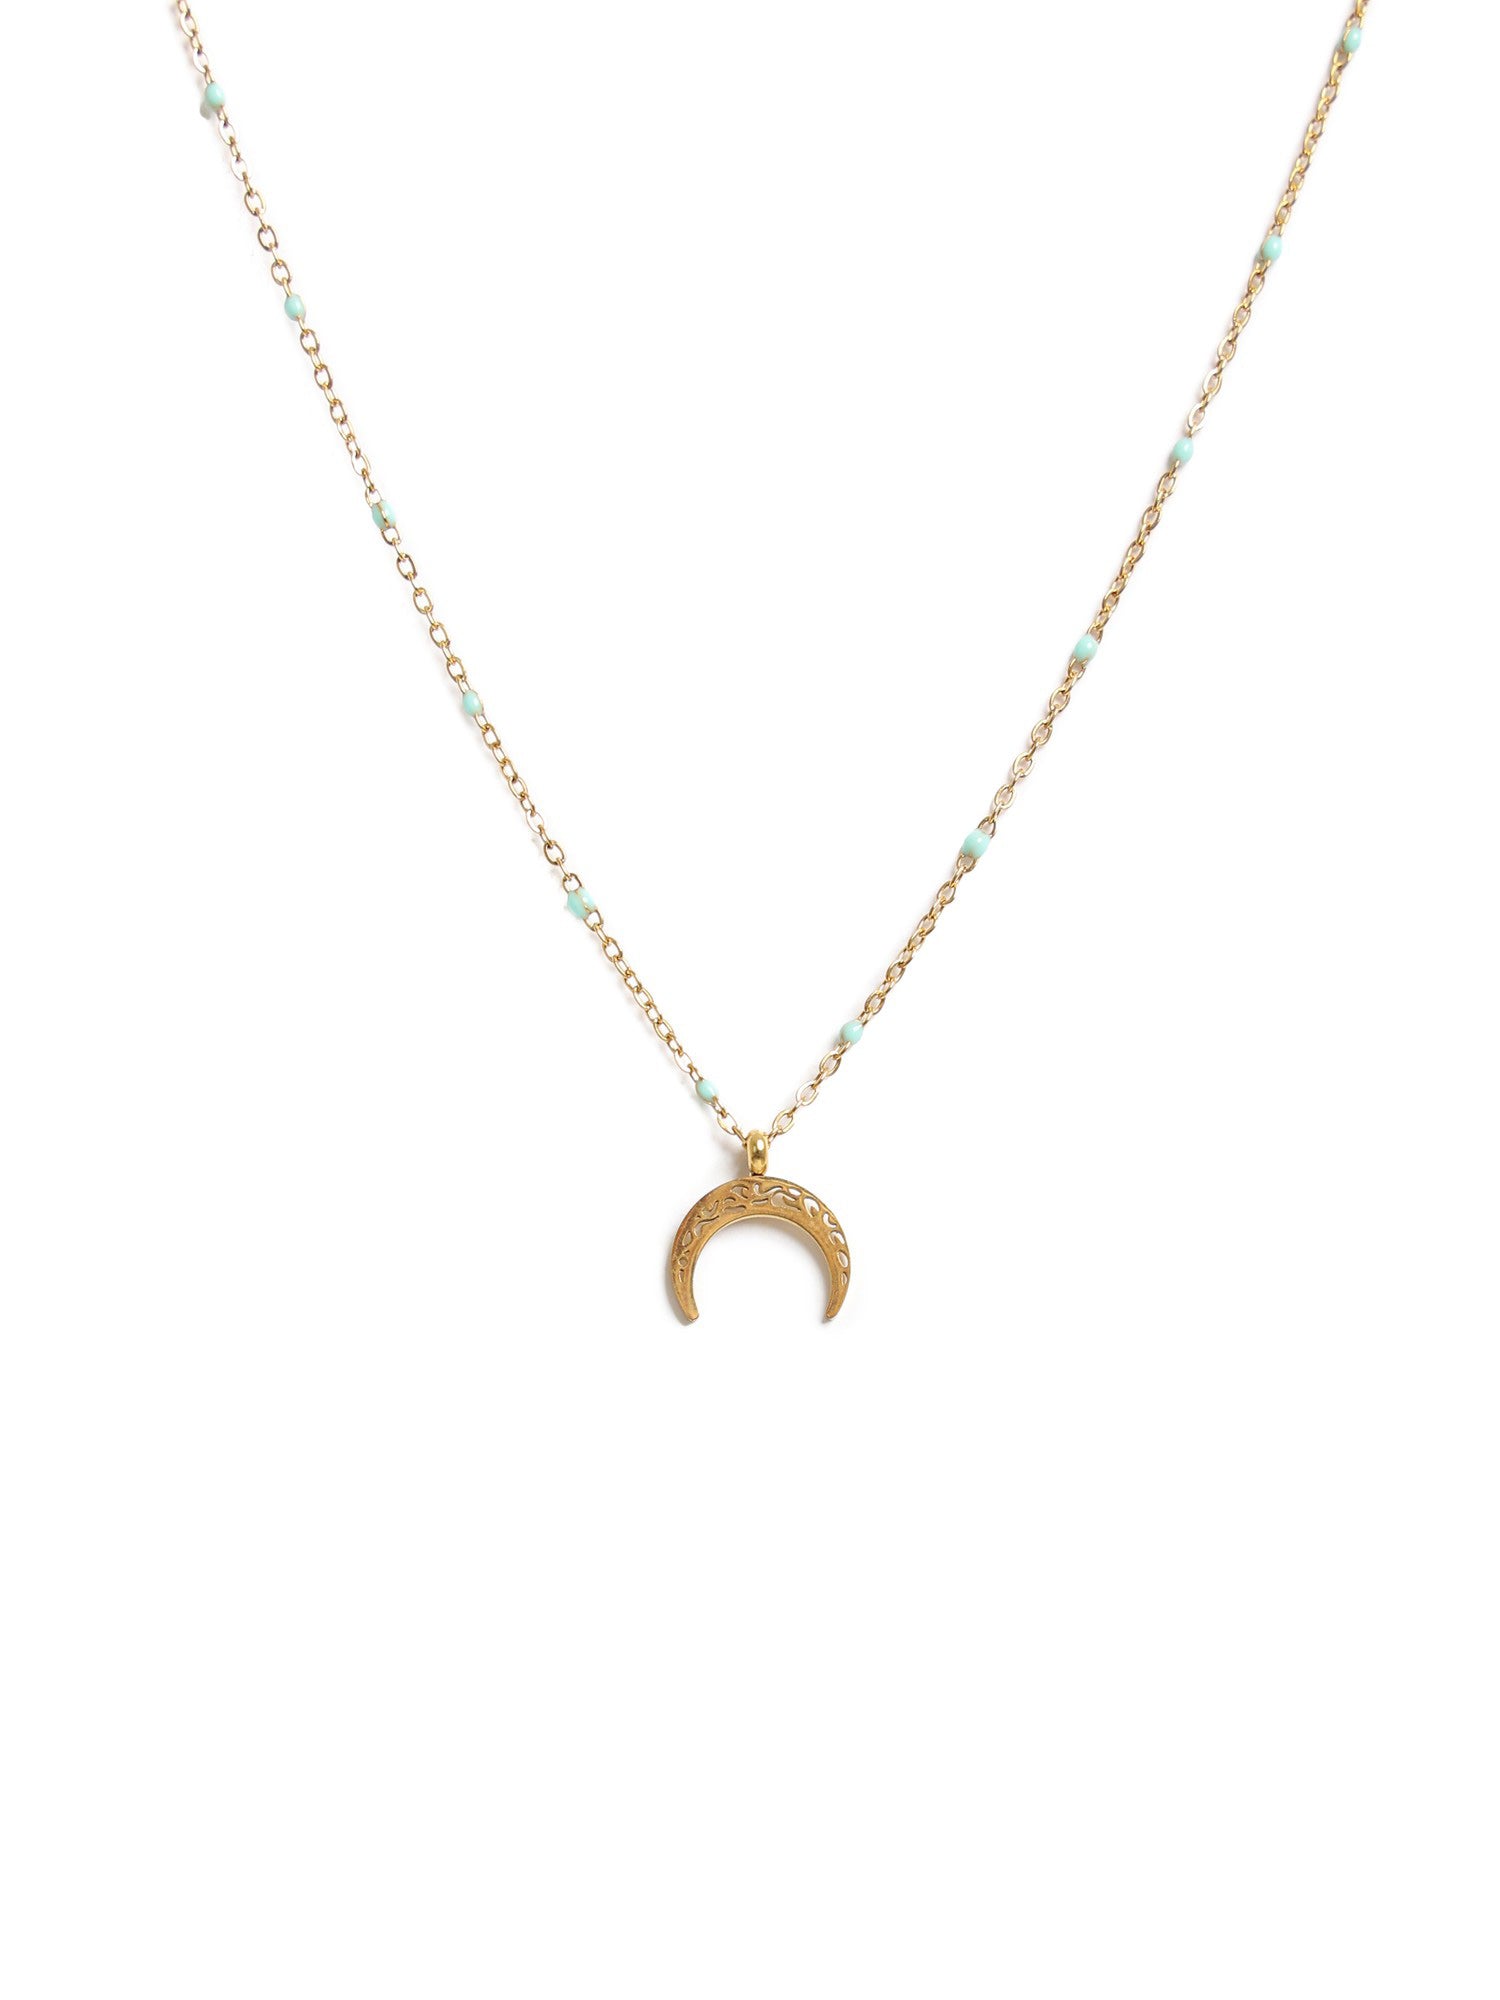 Ecliptic Gold-Tone Stainless Steel Chain Necklace